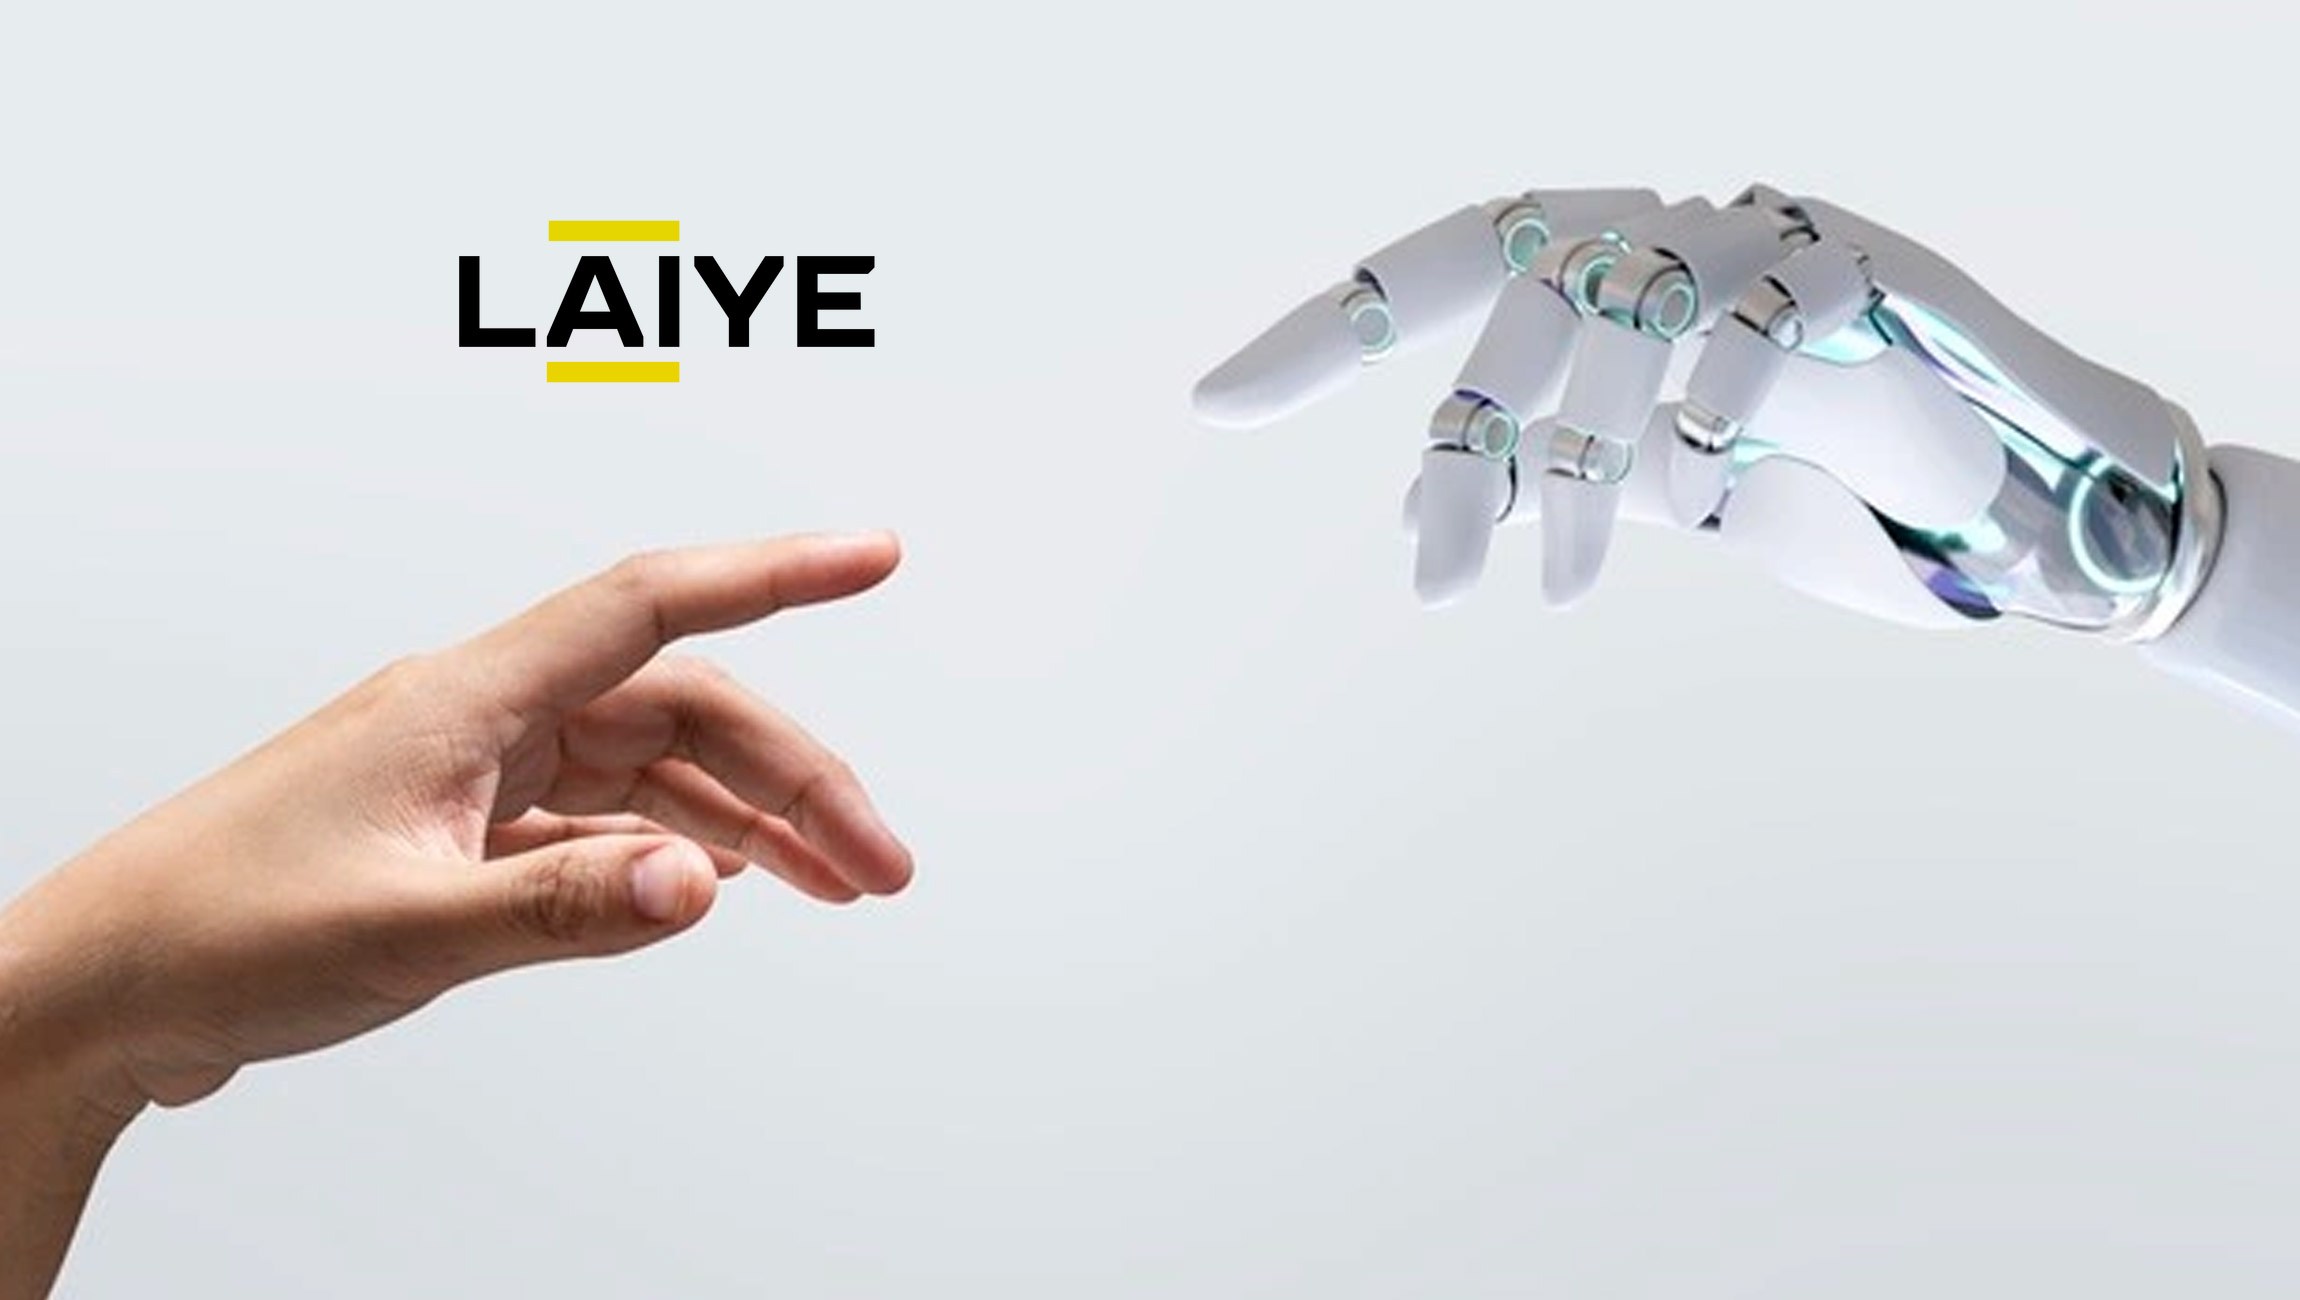 Laiye Eliminates Intelligent Automation Risks With First-Of-Its-Kind Business Results Guarantee